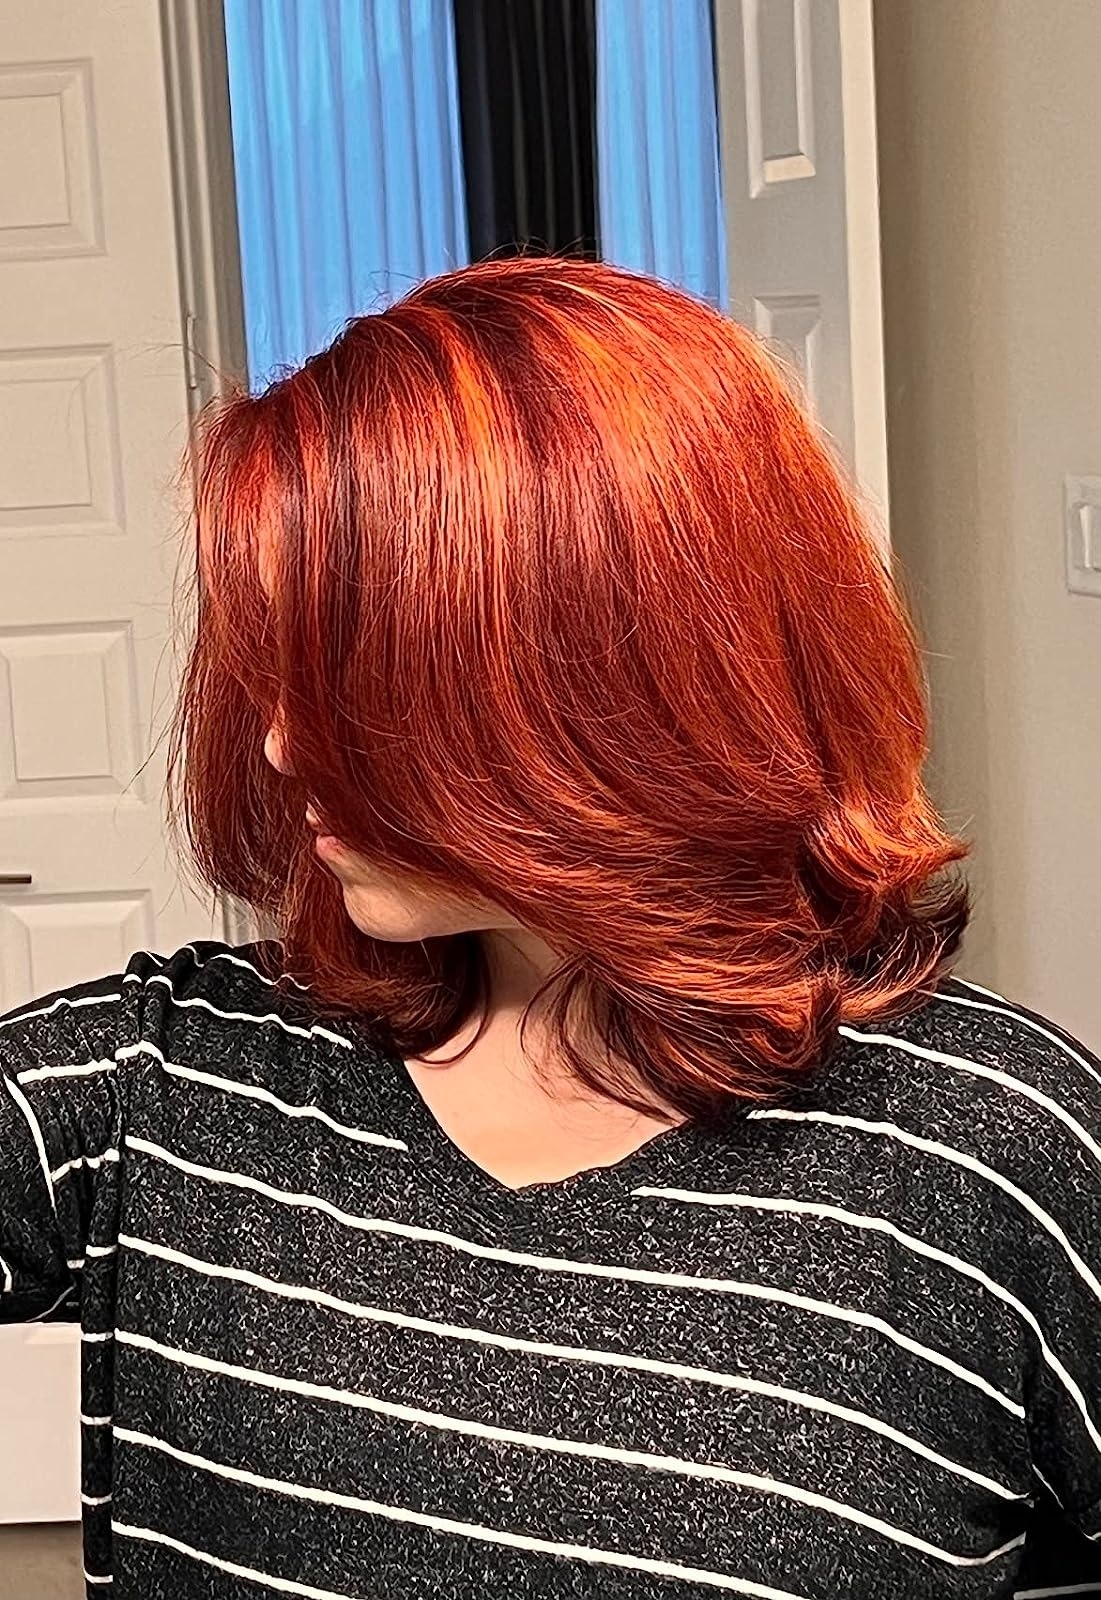 reviewer with bright red, straight, and shiny hair